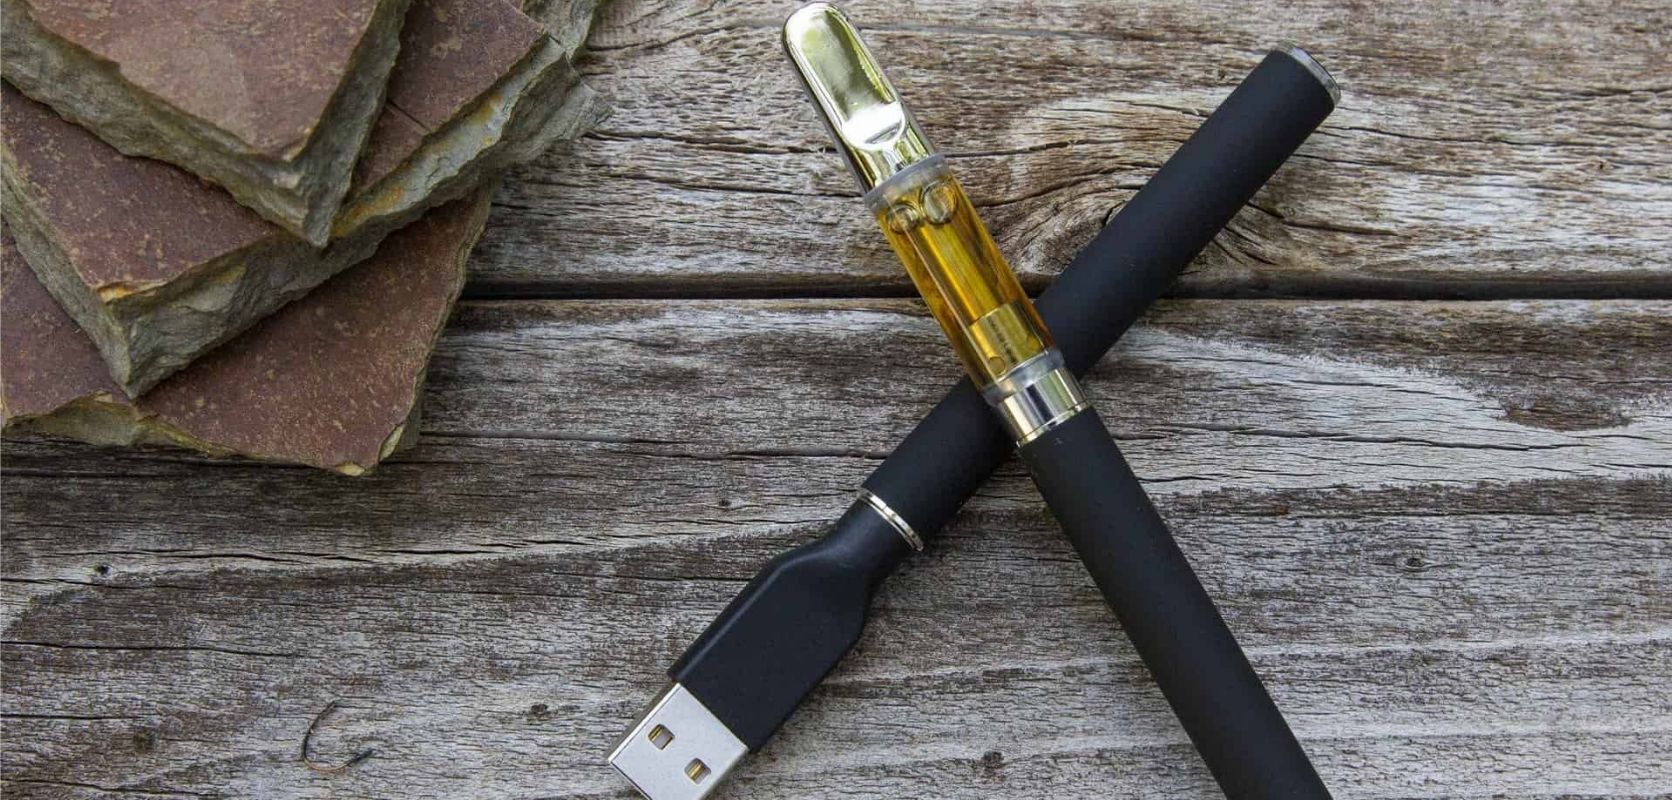 A CBD vape pen in Canada is one of the products that many medical marijuana patients prefer. You may be wondering why this is the case.